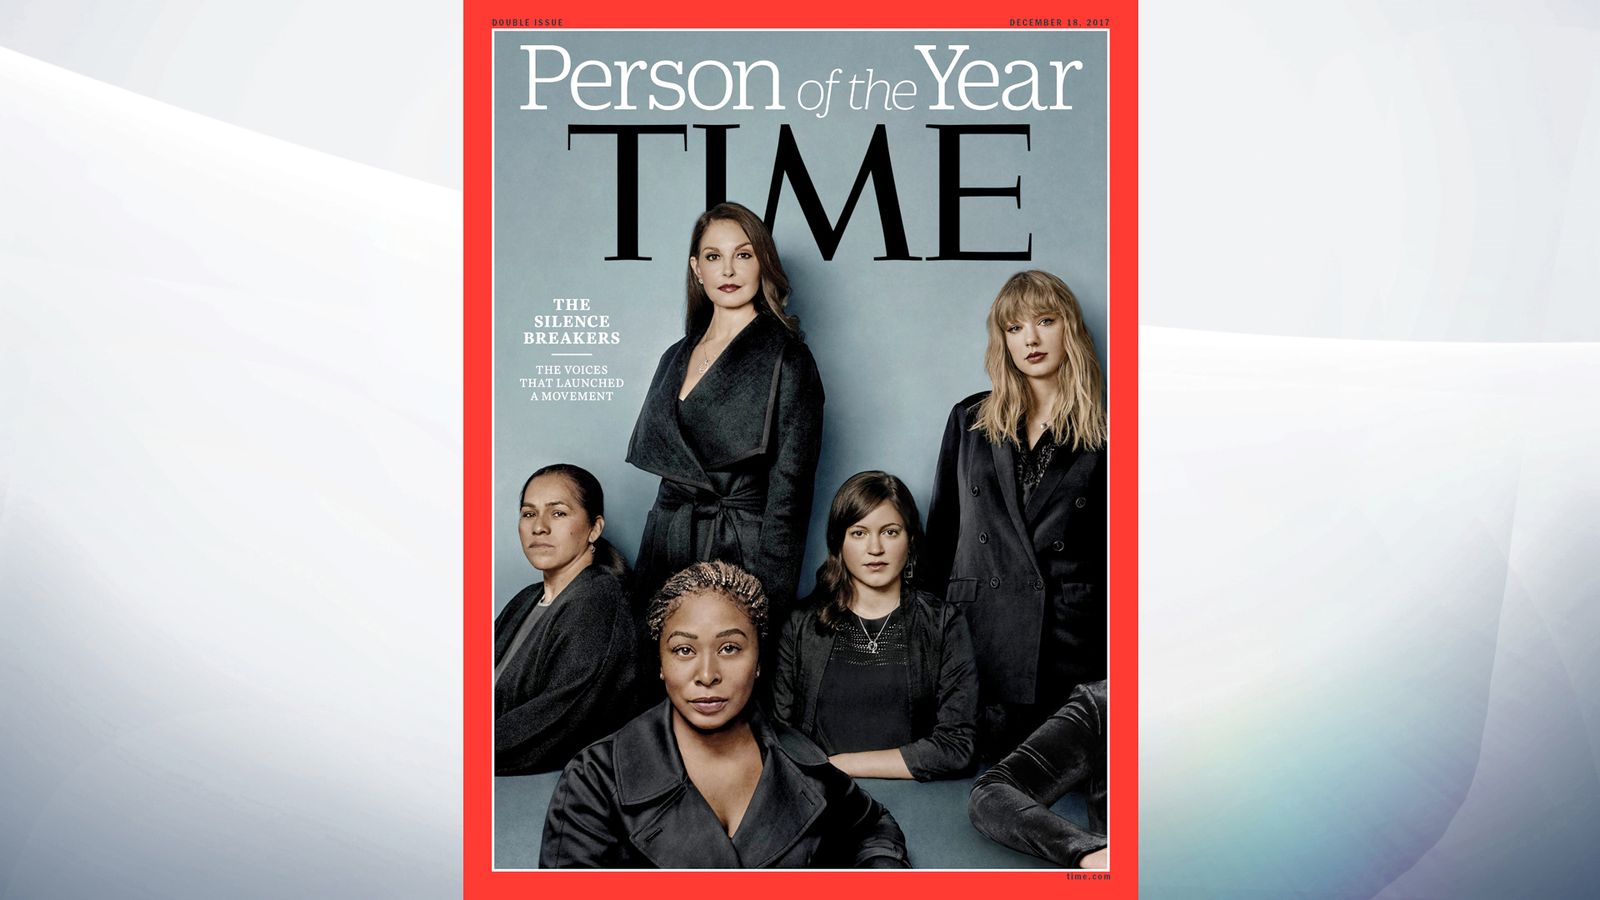 MeToo Time magazine's Person of the Year prize goes to 'Silence Breakers'